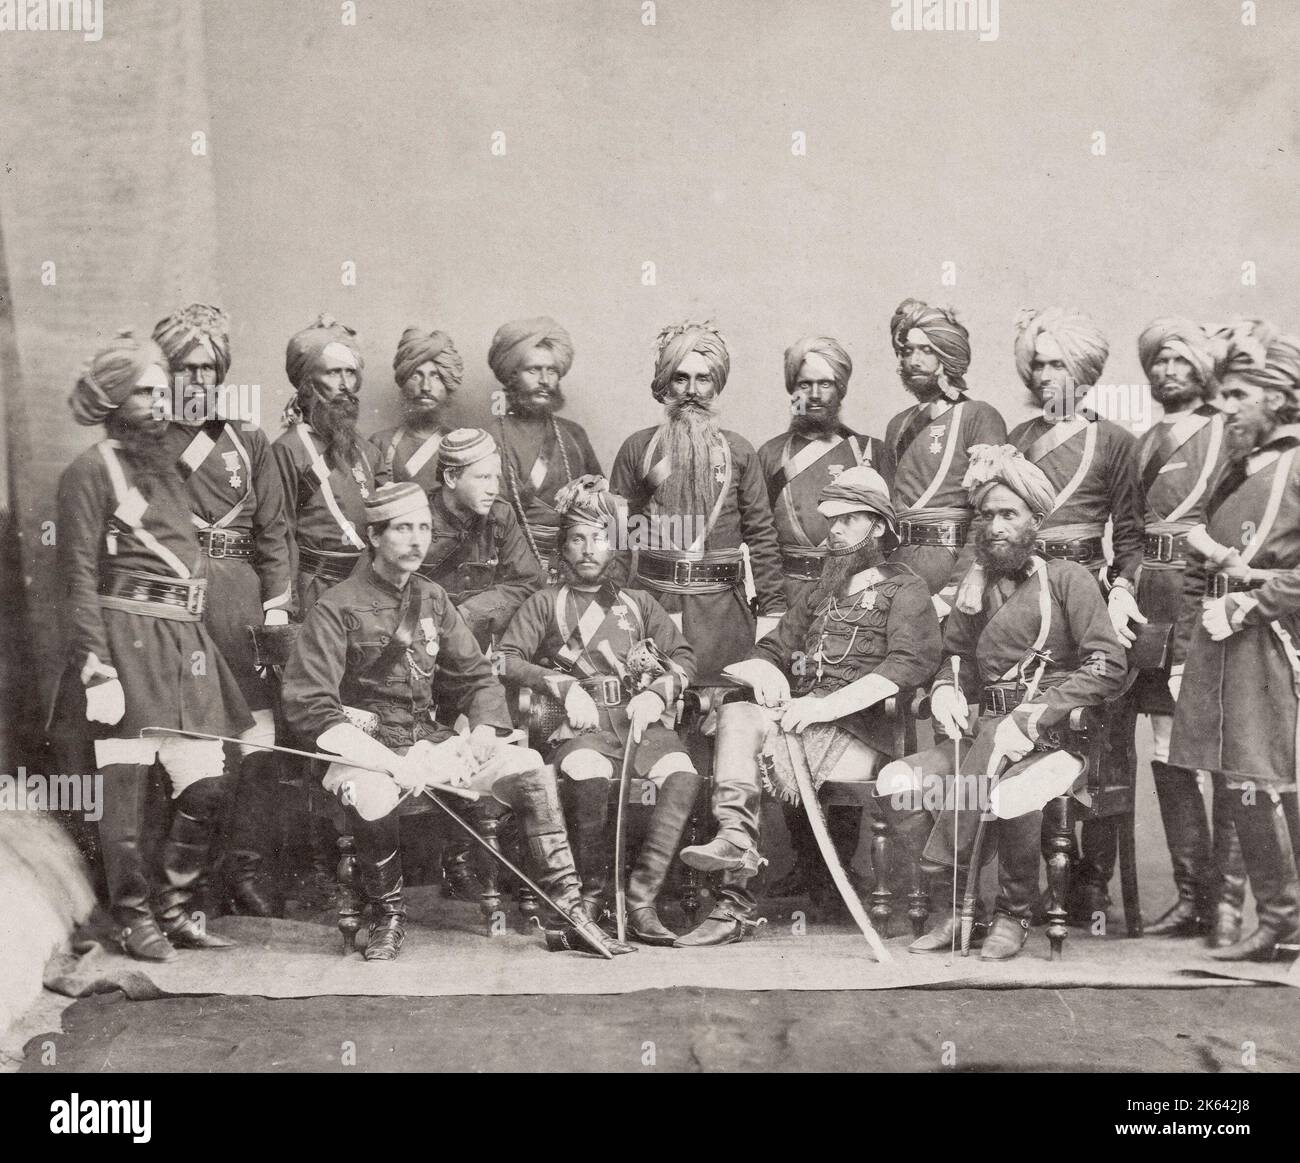 Vintage 19th century photograph - British army in India, 1860s - officers of the 9th BBengal Cavalry 1864 Stock Photo